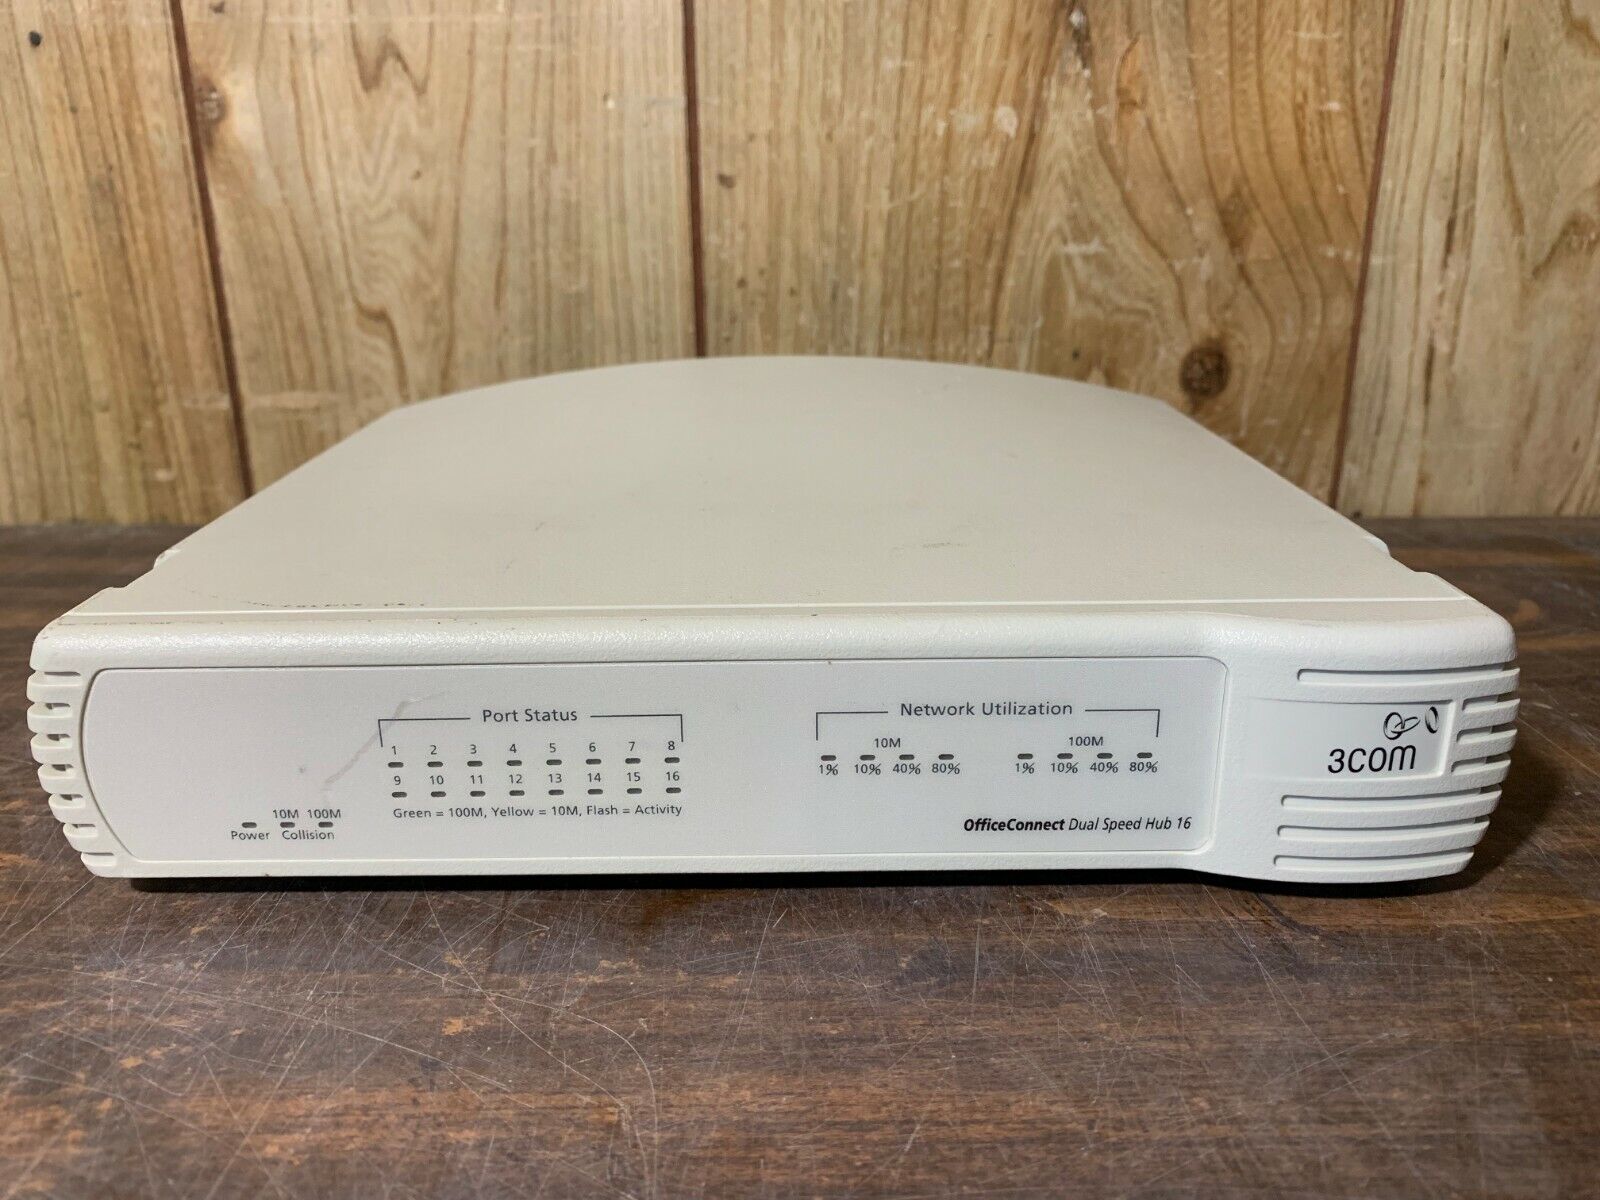 3com OfficeConnect Dual Speed Switch 16 Ports Desktop Series 3C16792A